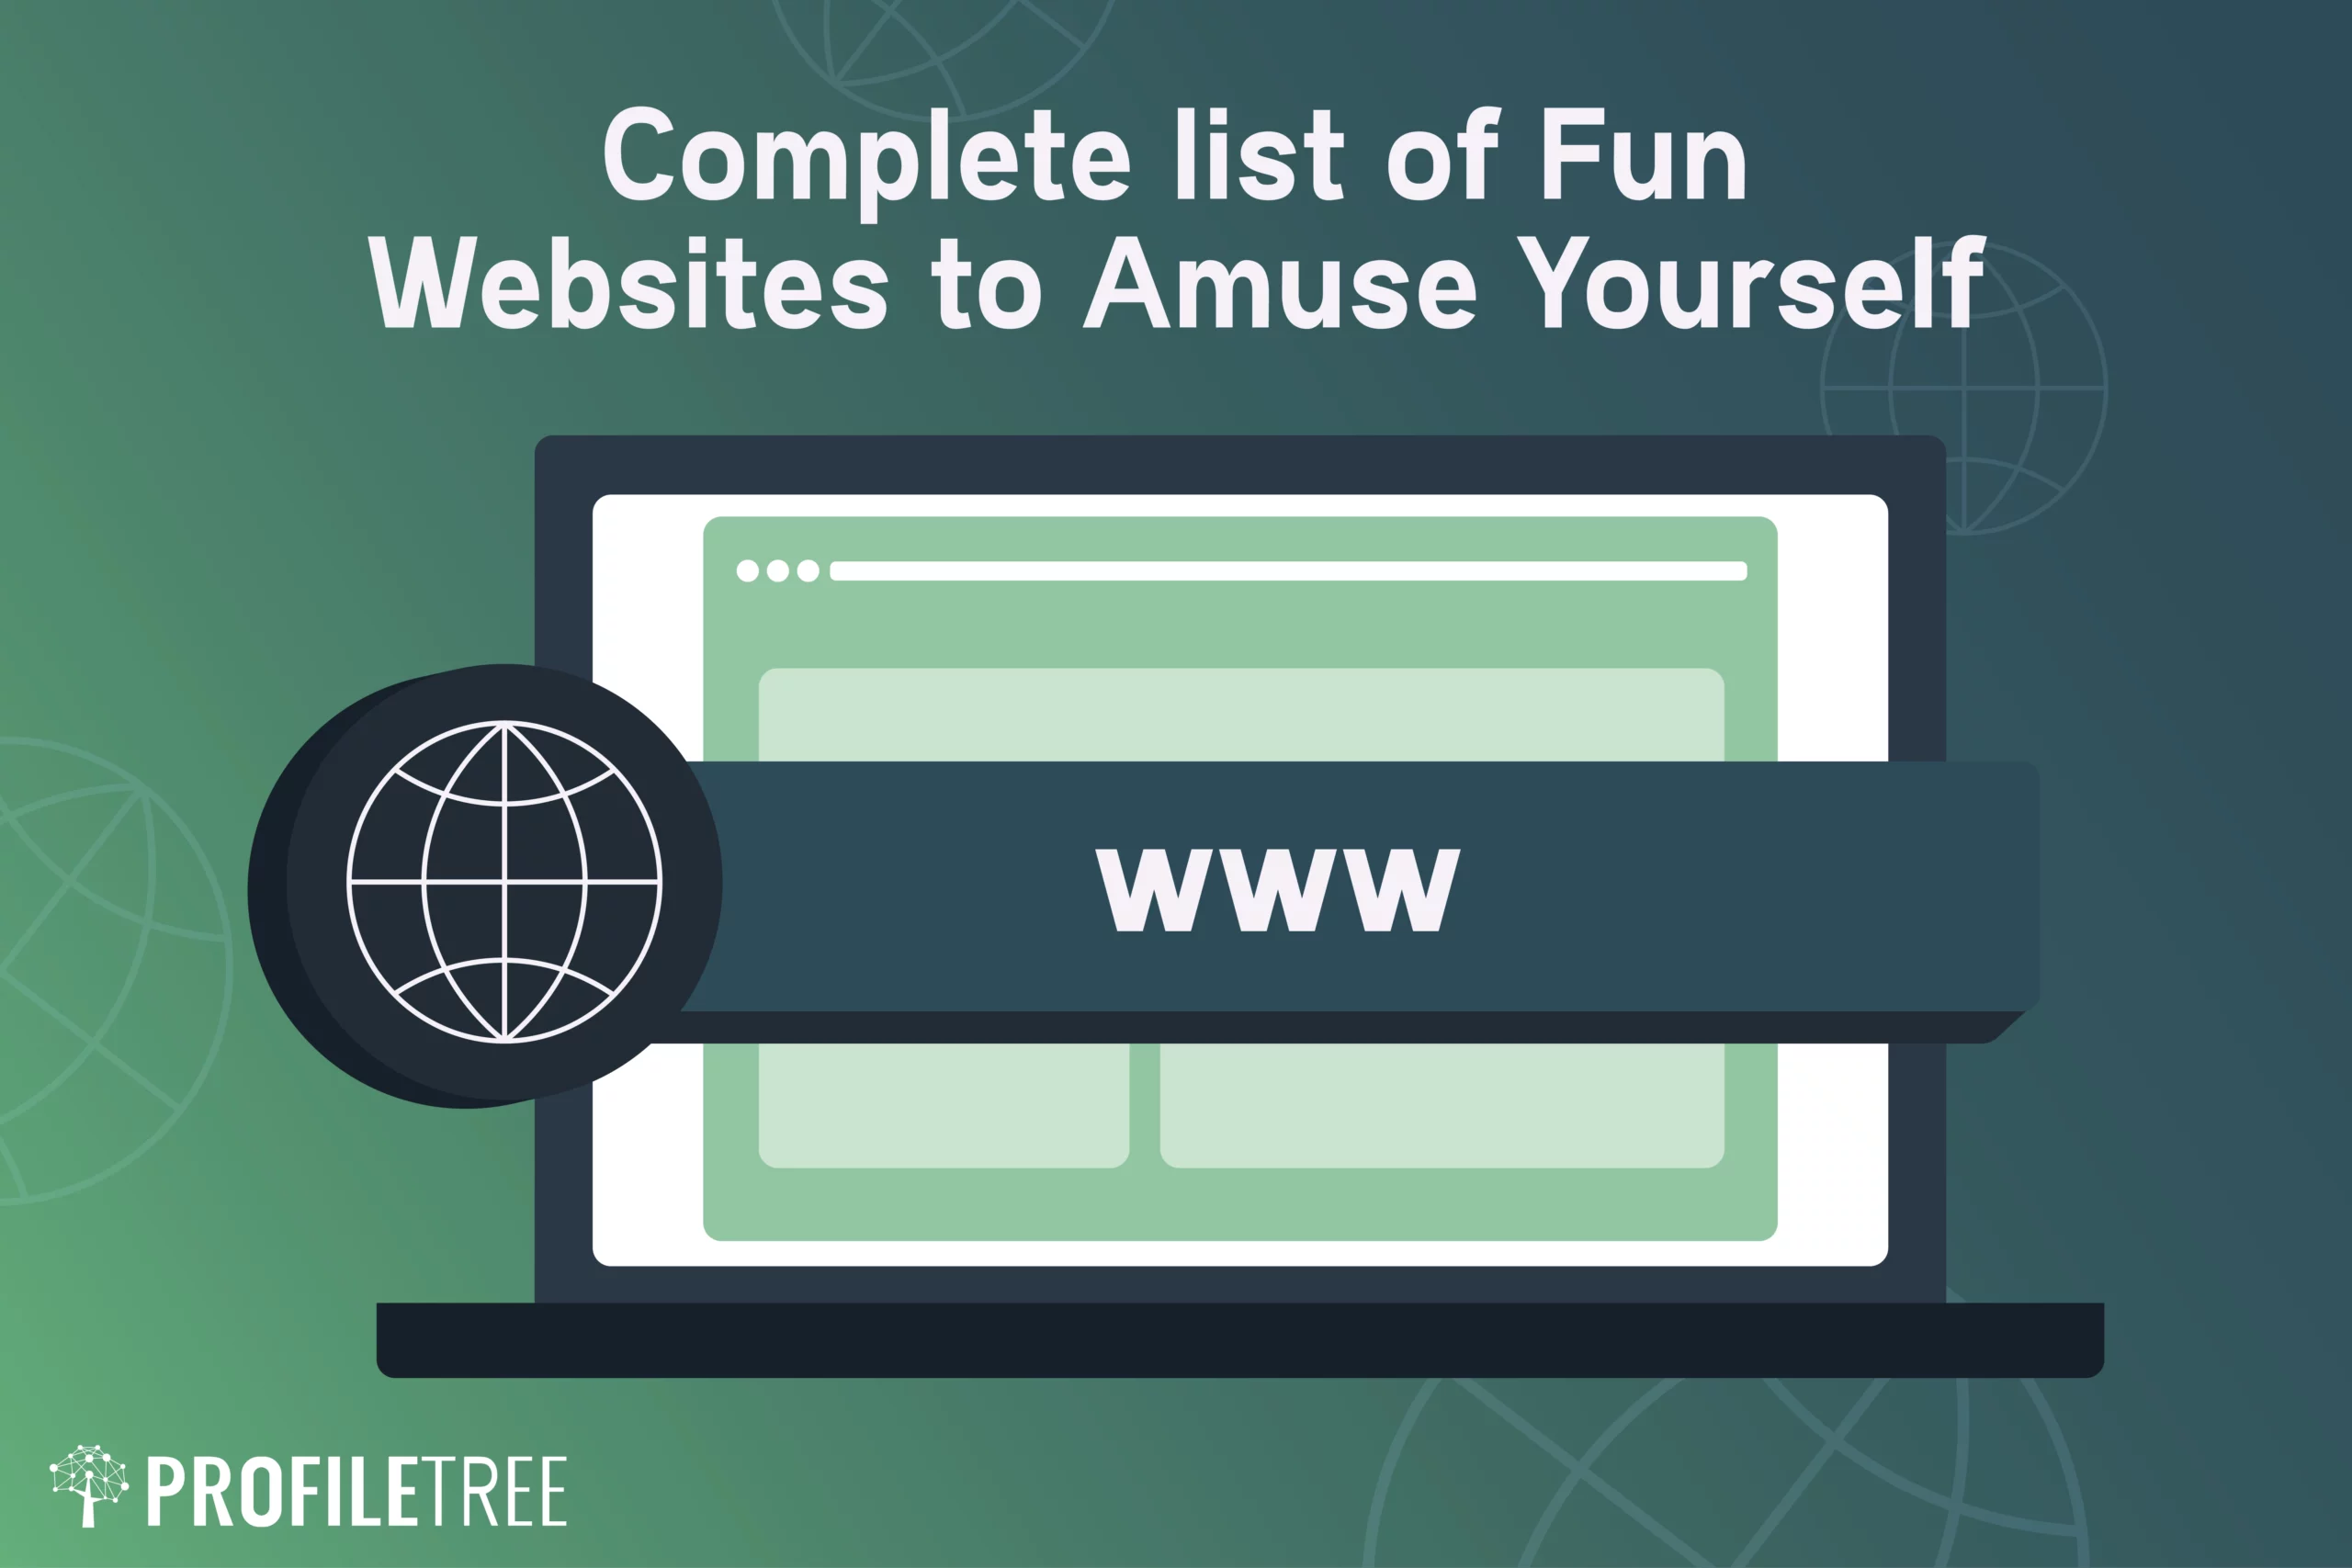 Complete list of Fun Websites to Amuse Yourself